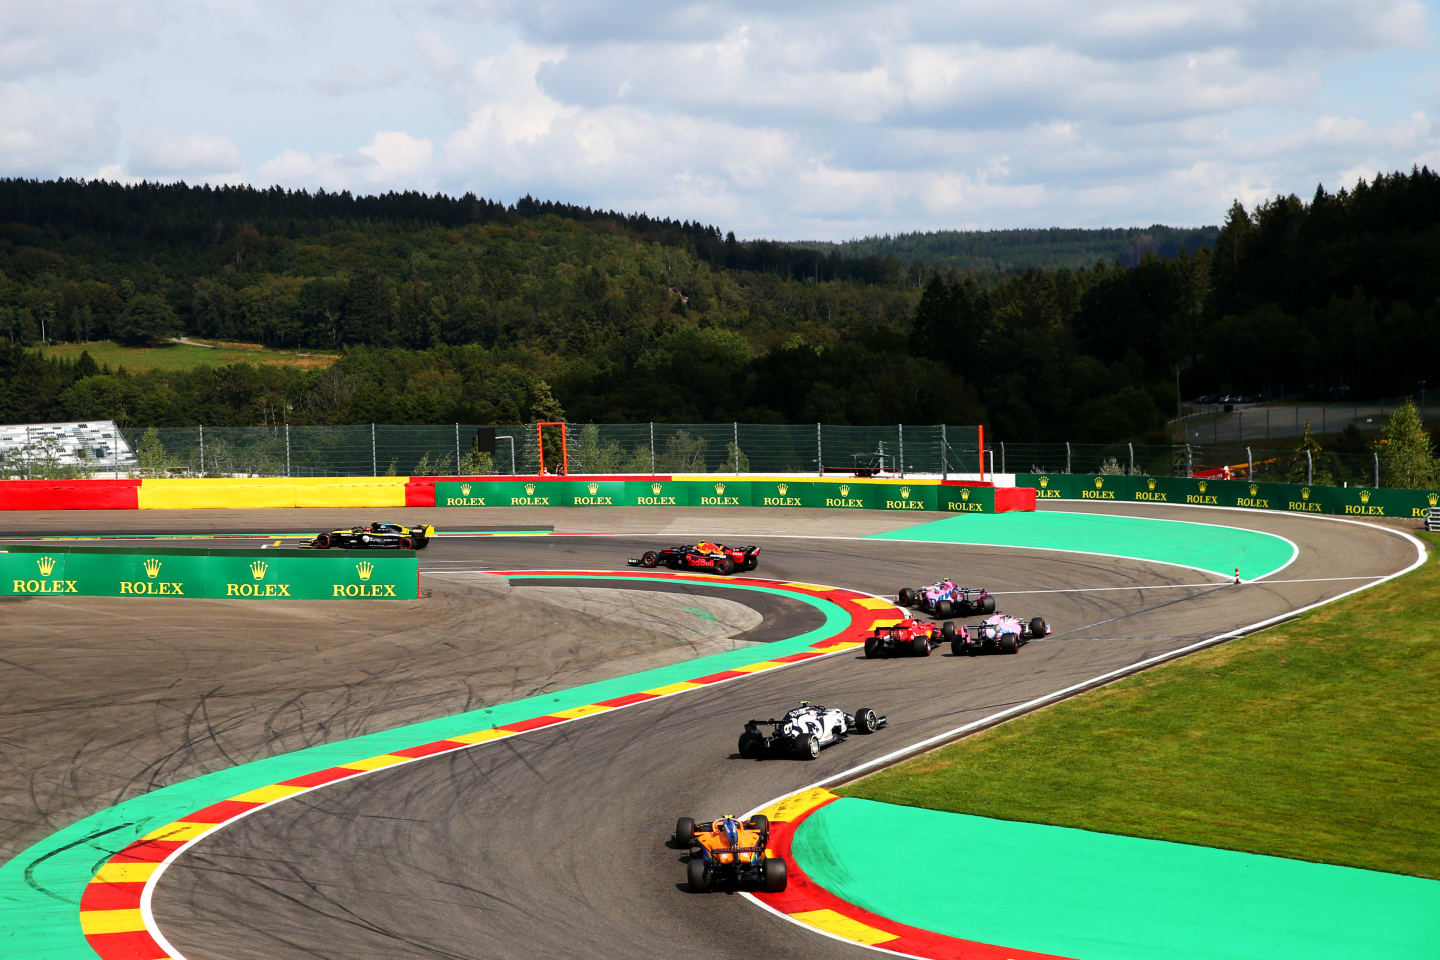 SPA, BELGIUM - AUGUST 30: A general view as cars round the last corners during the F1 Grand Prix of